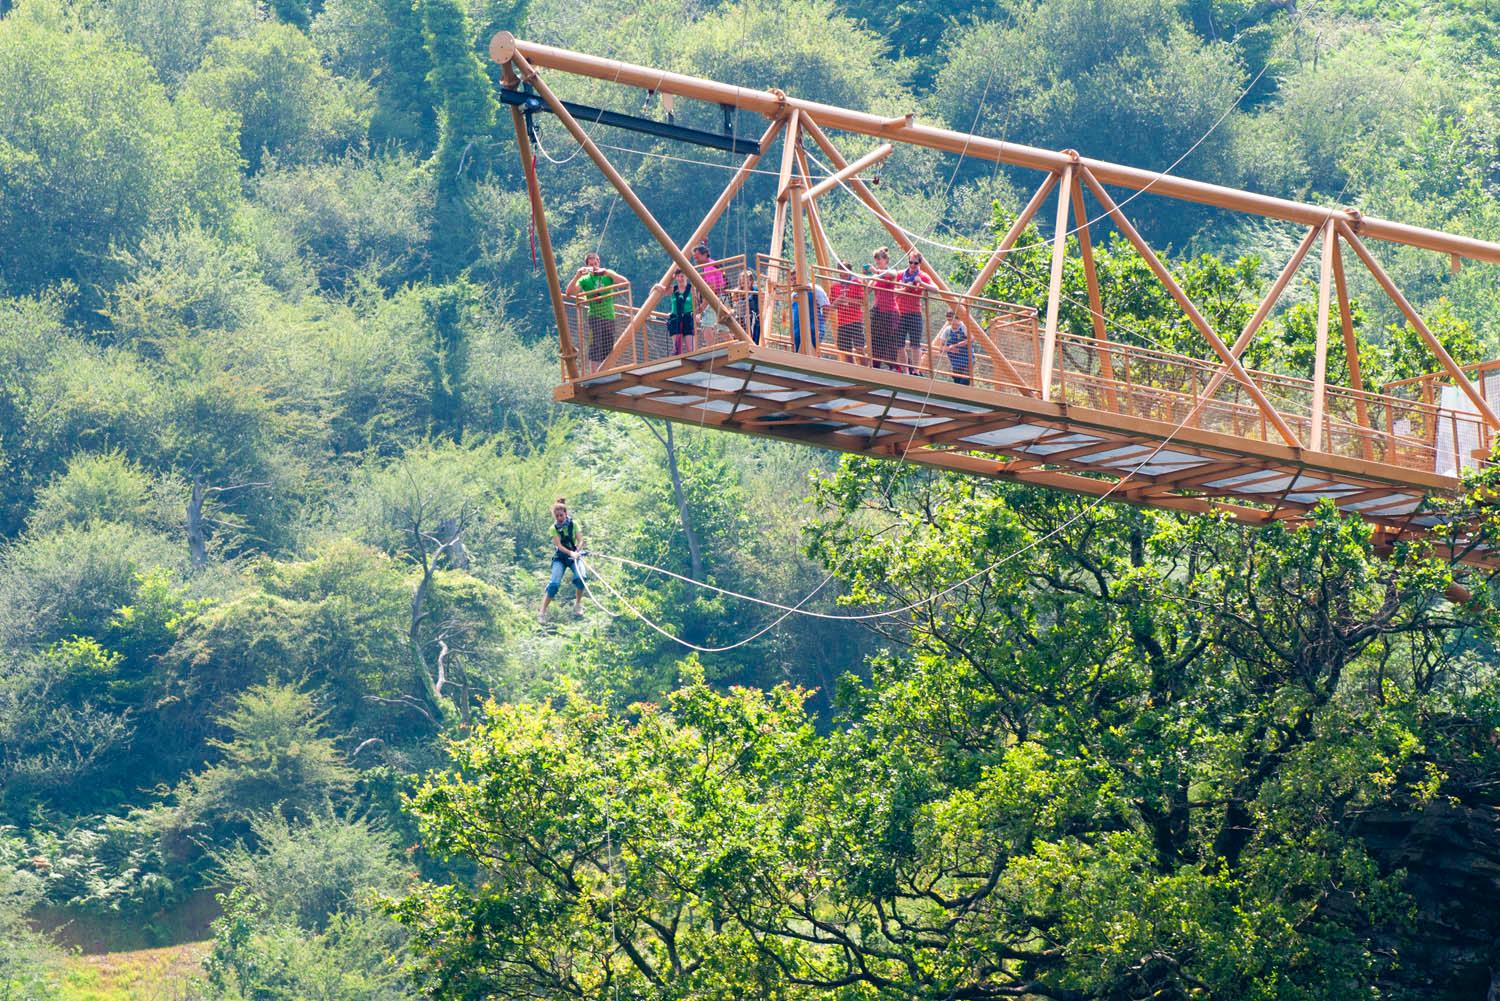 Zip lines and people in an adventure park